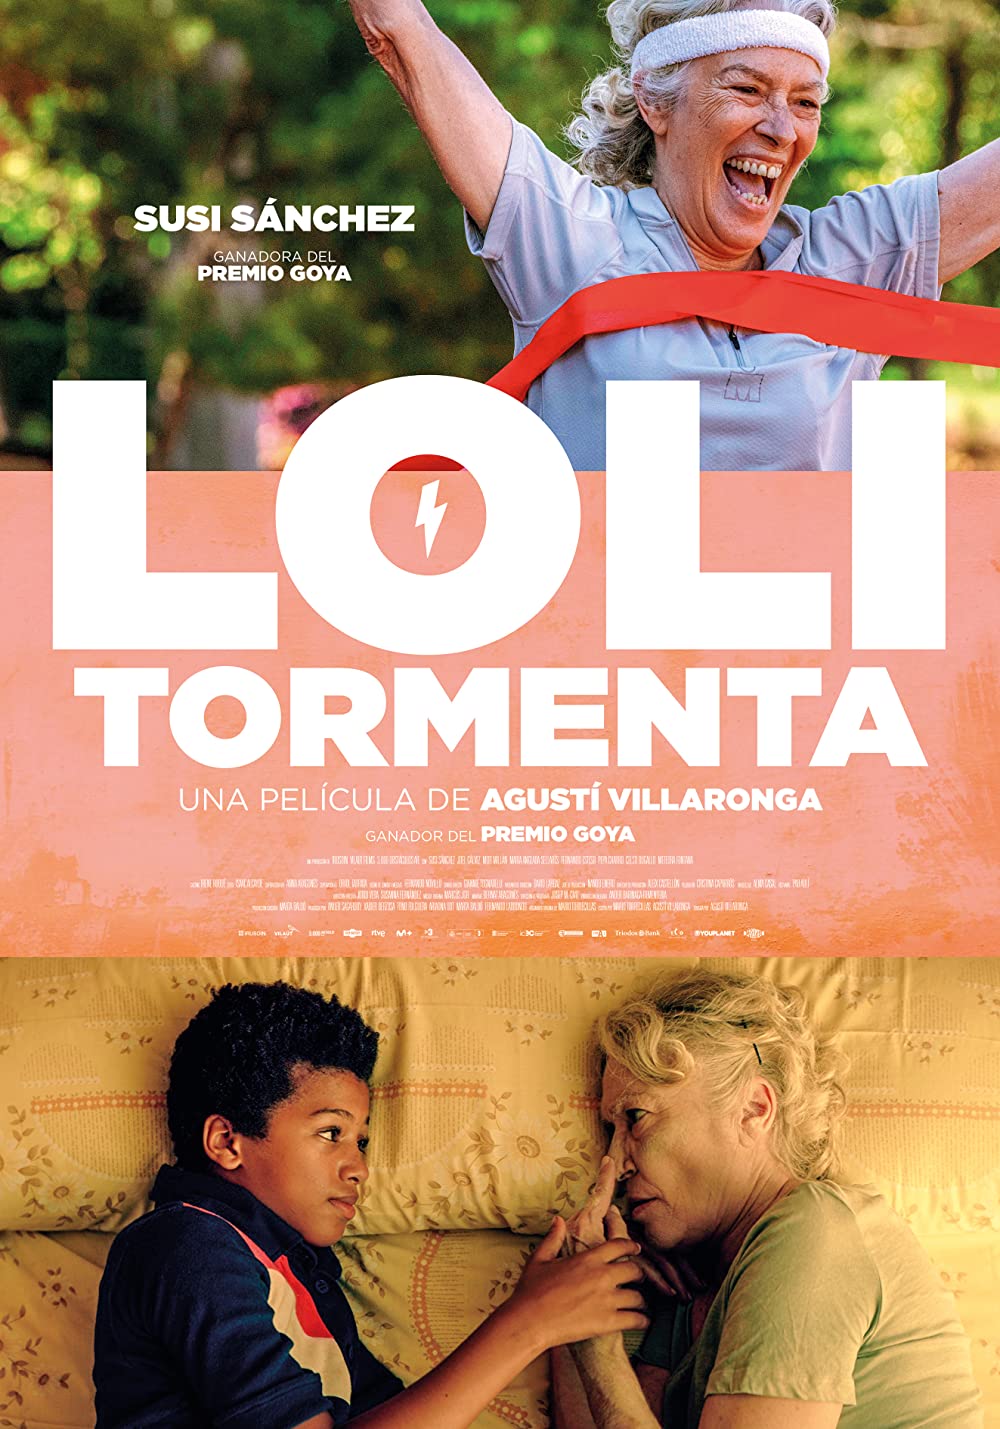 Loli Tormenta Movie (2023) Cast, Release Date, Story, Budget, Collection, Poster, Trailer, Review